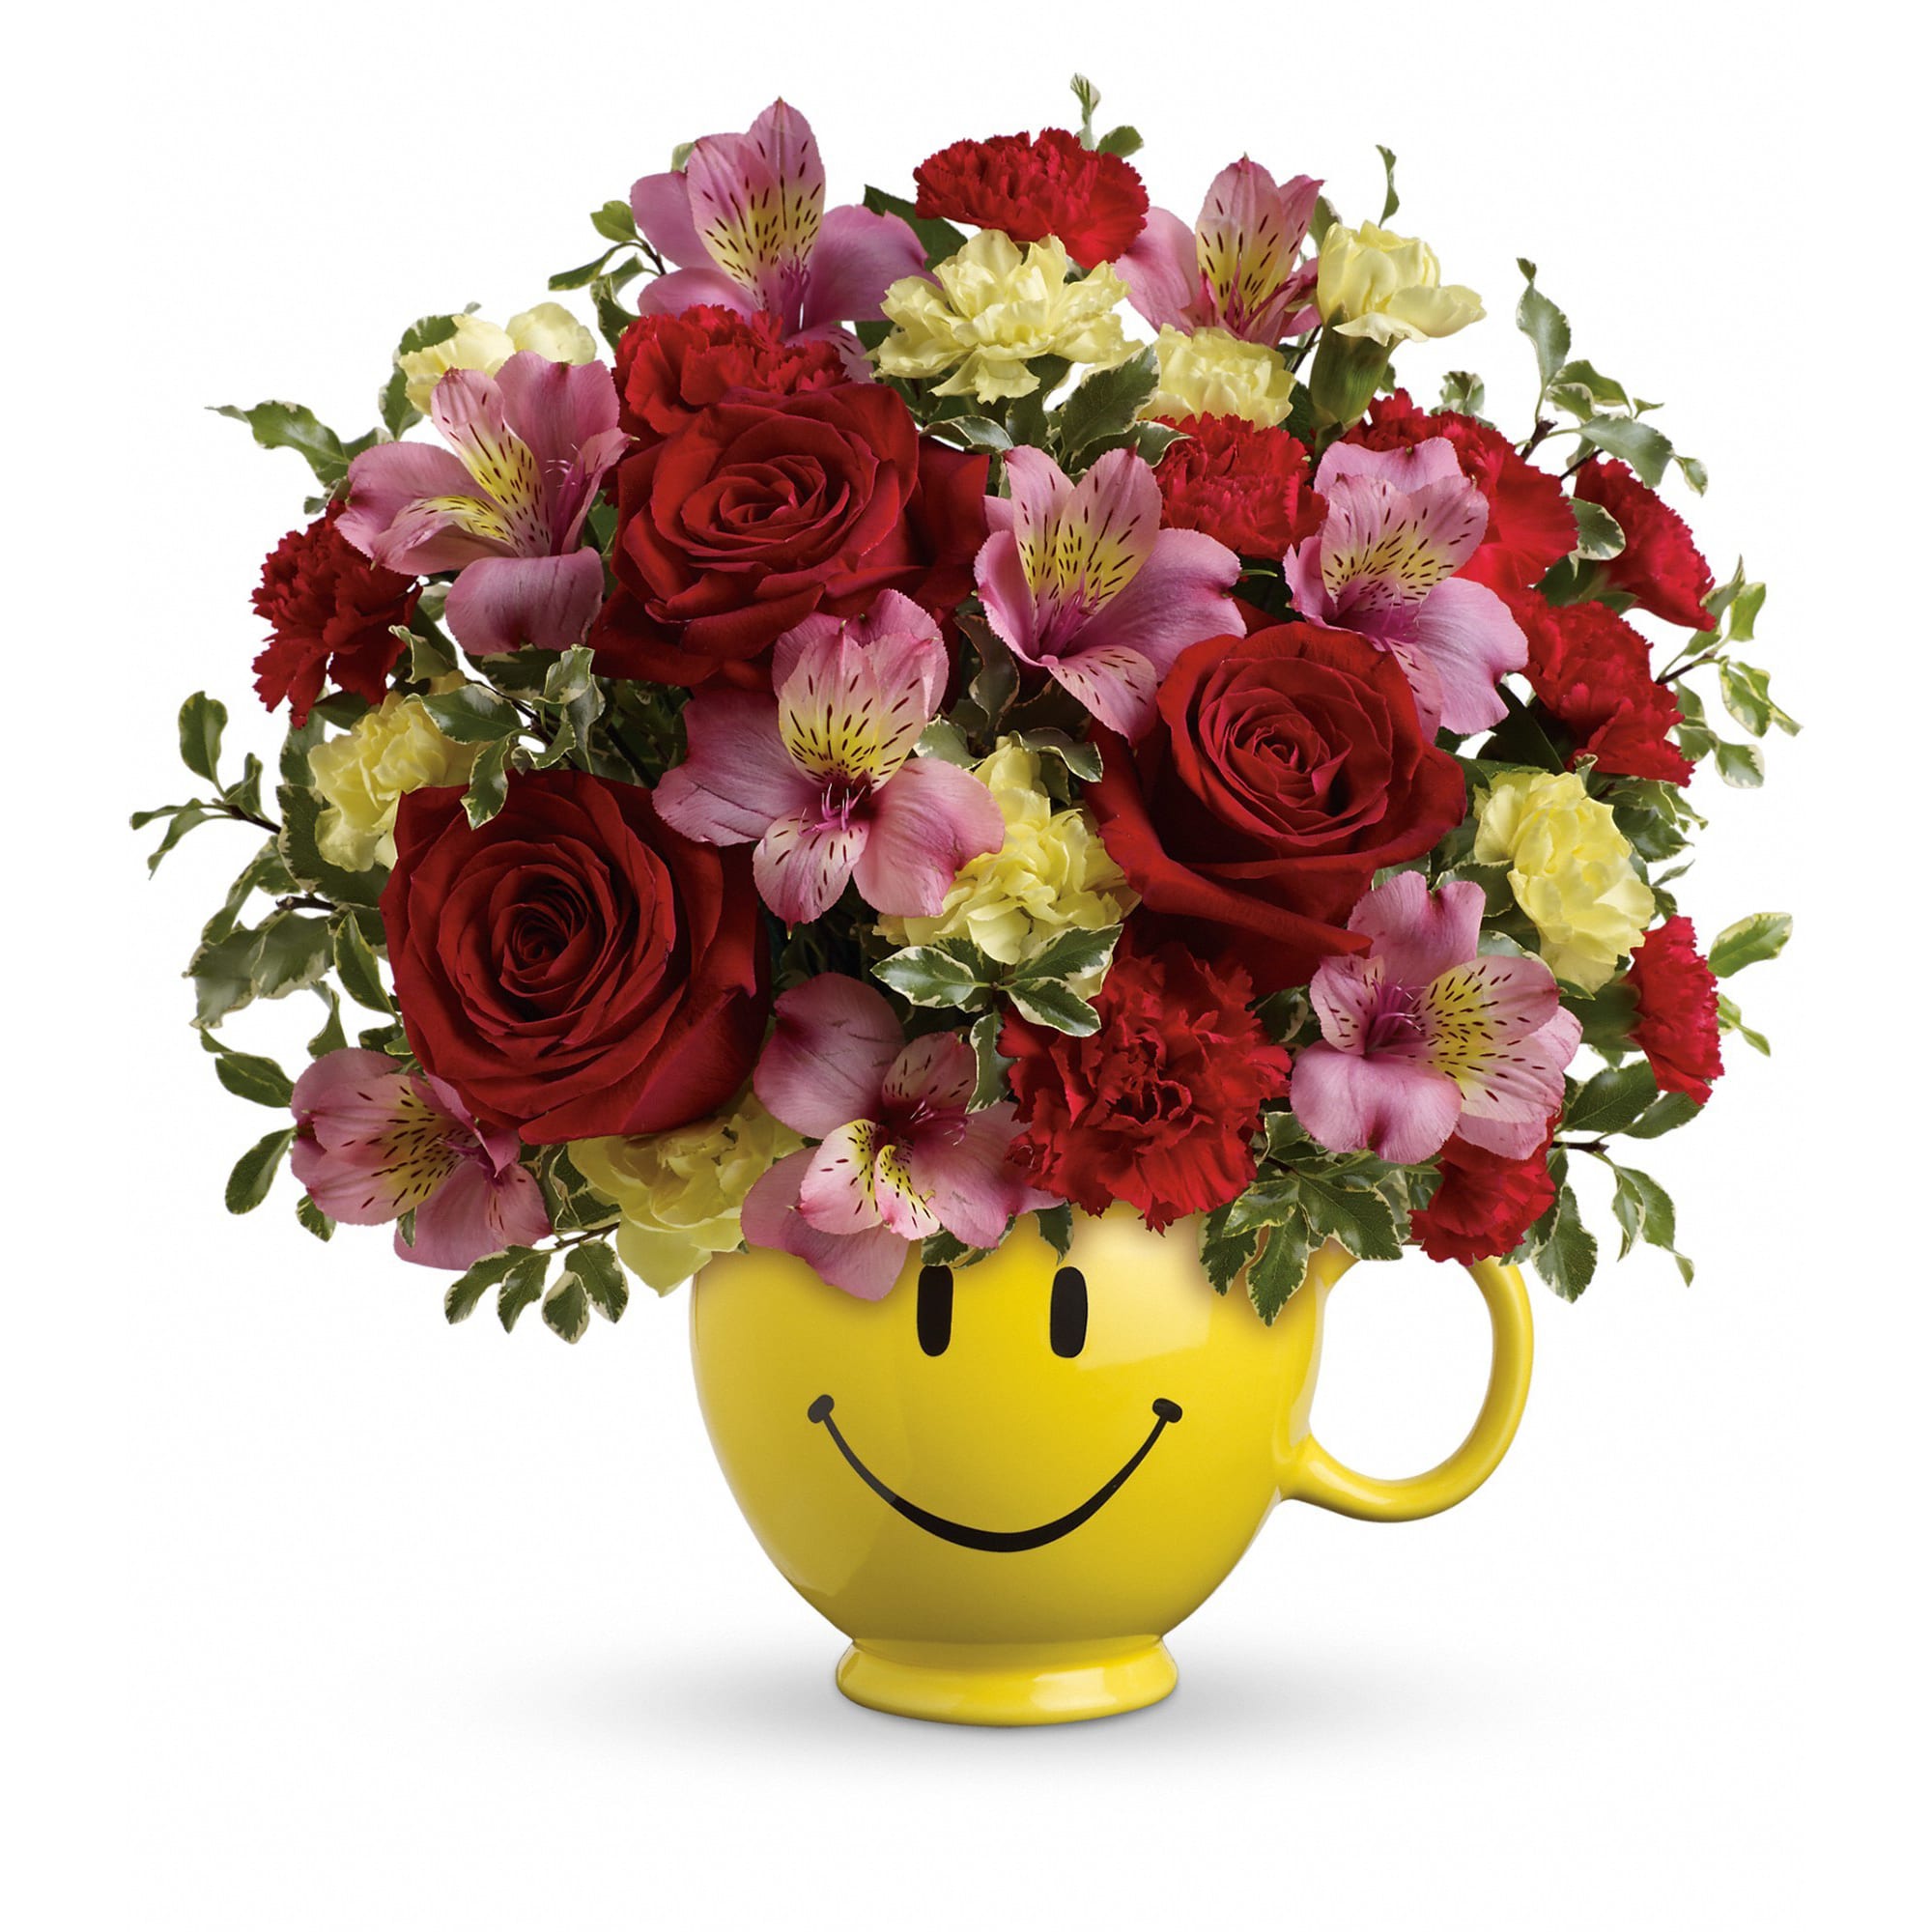 So Happy You're Mine Bouquet by Teleflora - Send smiles across the miles with this magnificent mug of blooms! Sure to become their favorite for morning coffee, this sweet ceramic design brims with lush red roses, pink alstroemeria and miniature red and yellow carnations. It's a great way to send your love! 